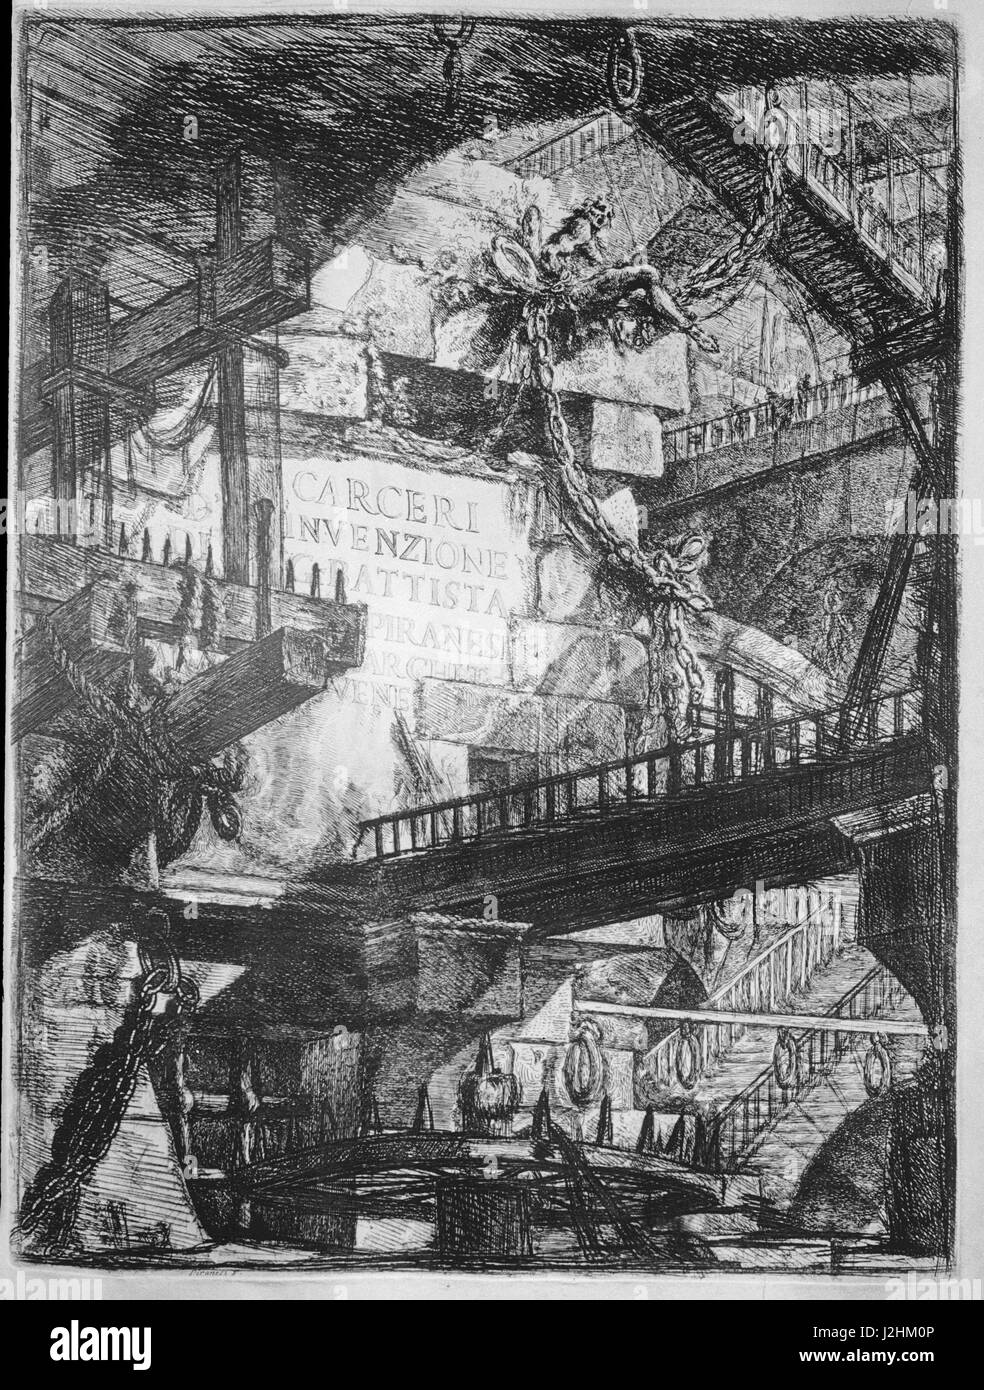 The Imaginary Prisons (Carceri d'invenzione), second version of the series of engravings by Giovanni Battista Piranesi, published in 1761.  Plate I: Title Plate  Private collection Stock Photo